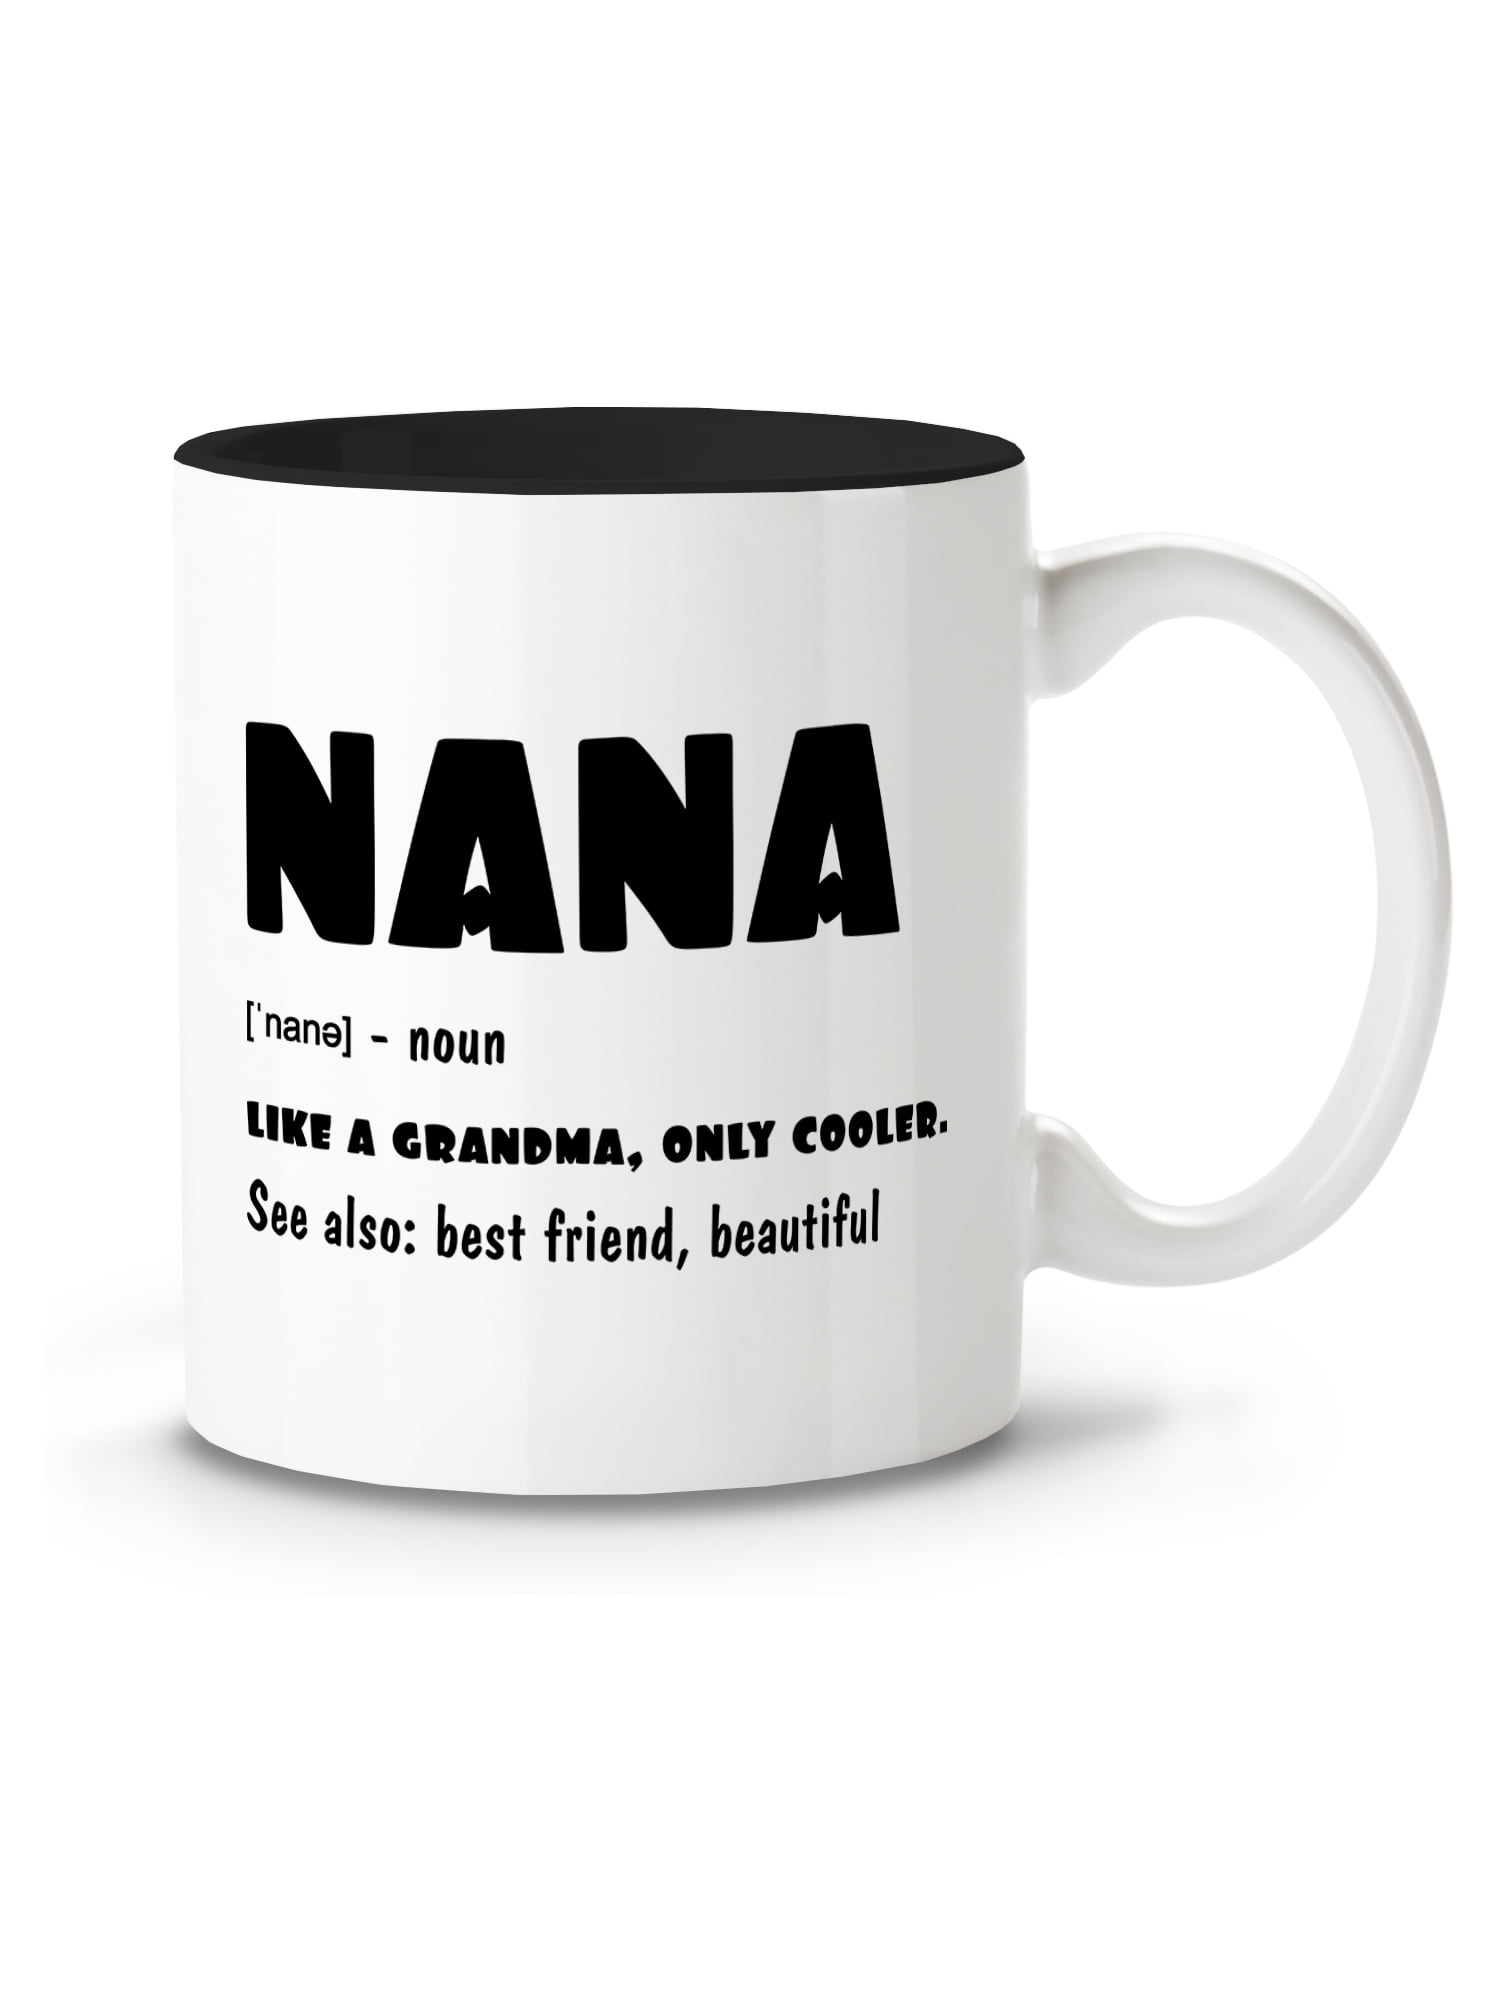 Novelty Grandma Gifts for any Birthday or Occasion Wonderful Unique Nan Gifts Cute Handmade Gift For Nan Great Gift Ideas for Nan